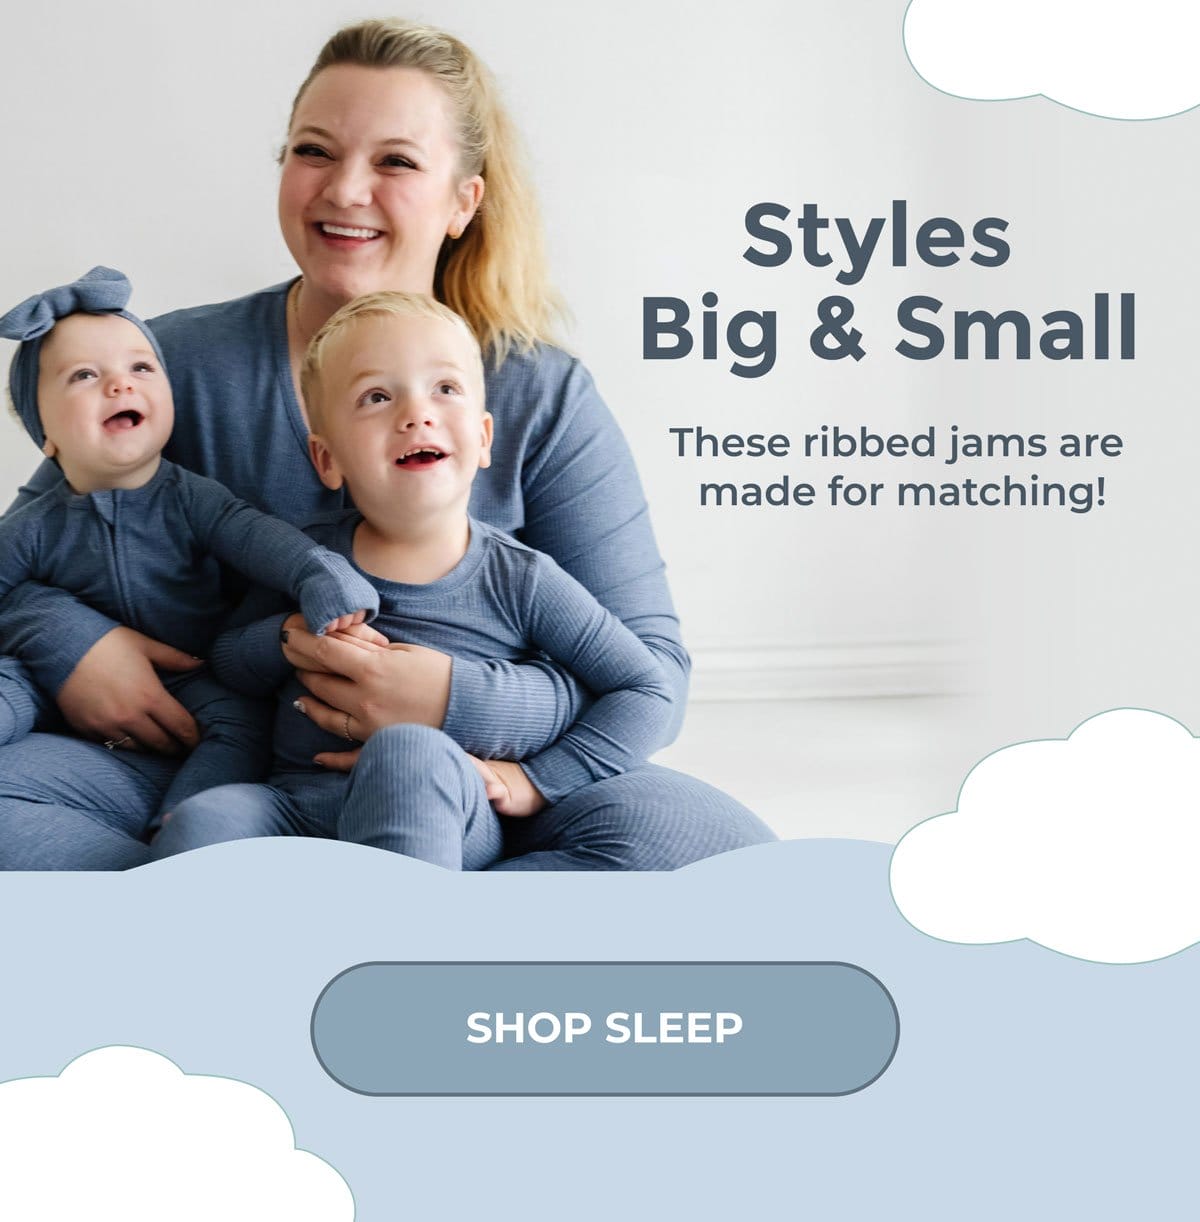 Styles Big & Small | These ribbed jams are made for matching! | SHOP SLEEP